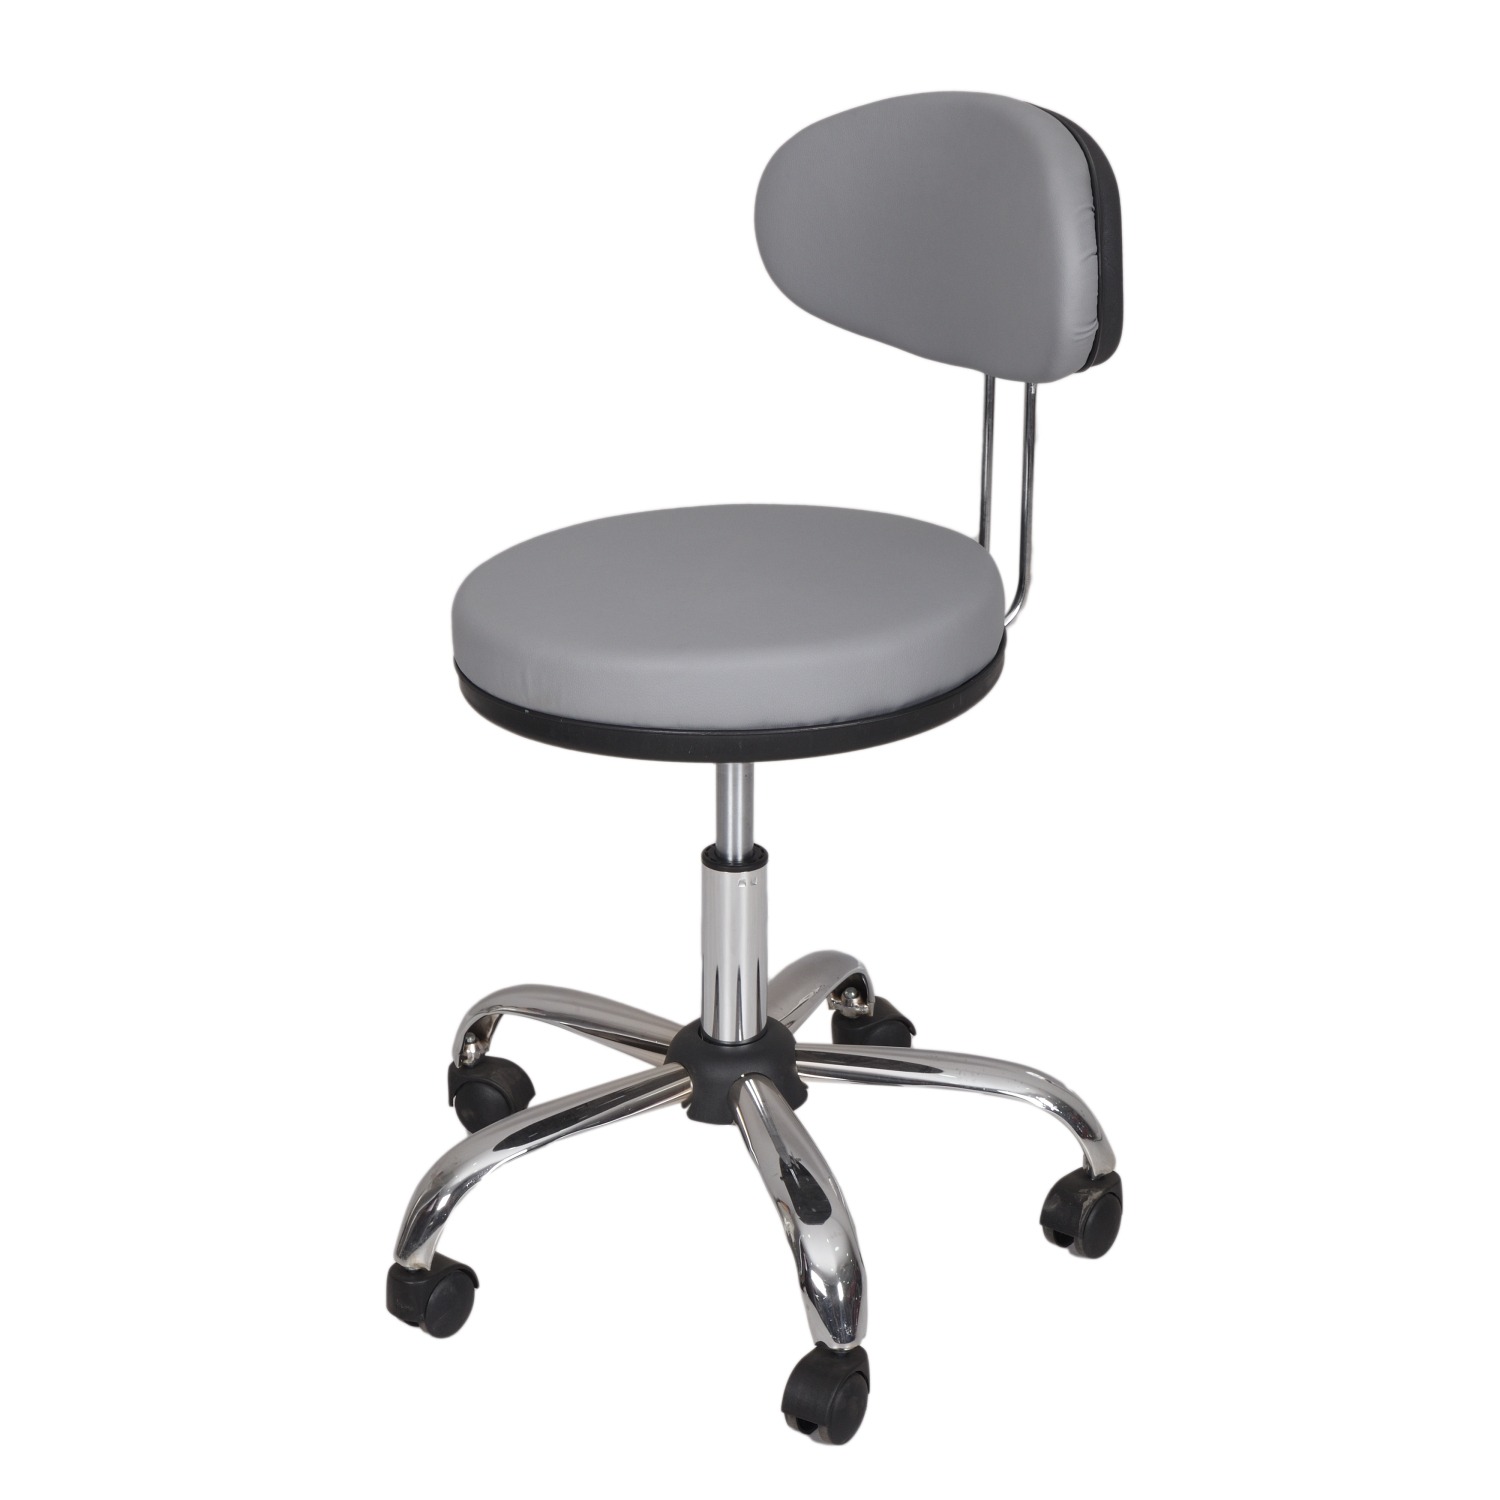 Medical Stool with Oval Backrest (Grey)